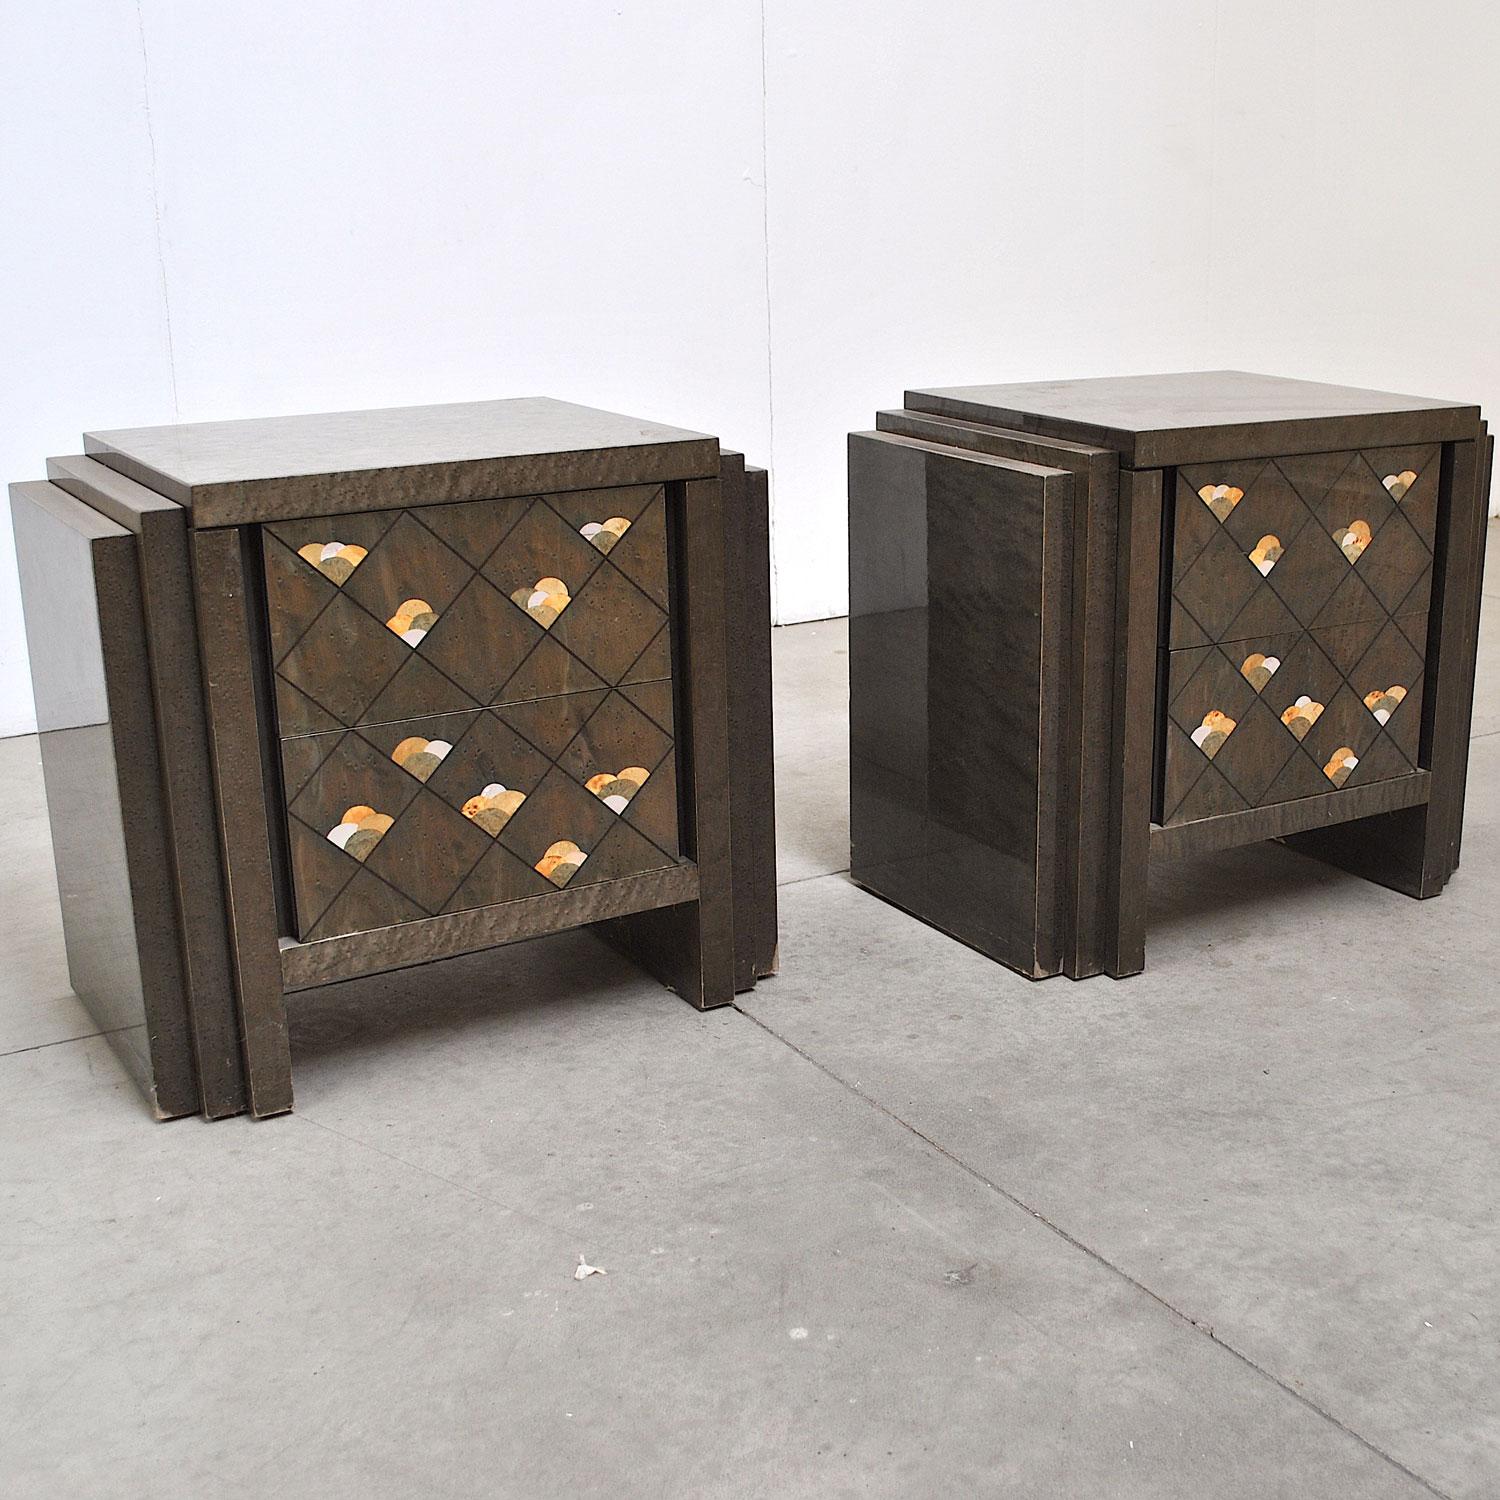 Luciano Frigerio Italian midcentury nightstands late 1970s. The materials are a wooden construction, bird's-eye veneer, painted green, wood inlays.